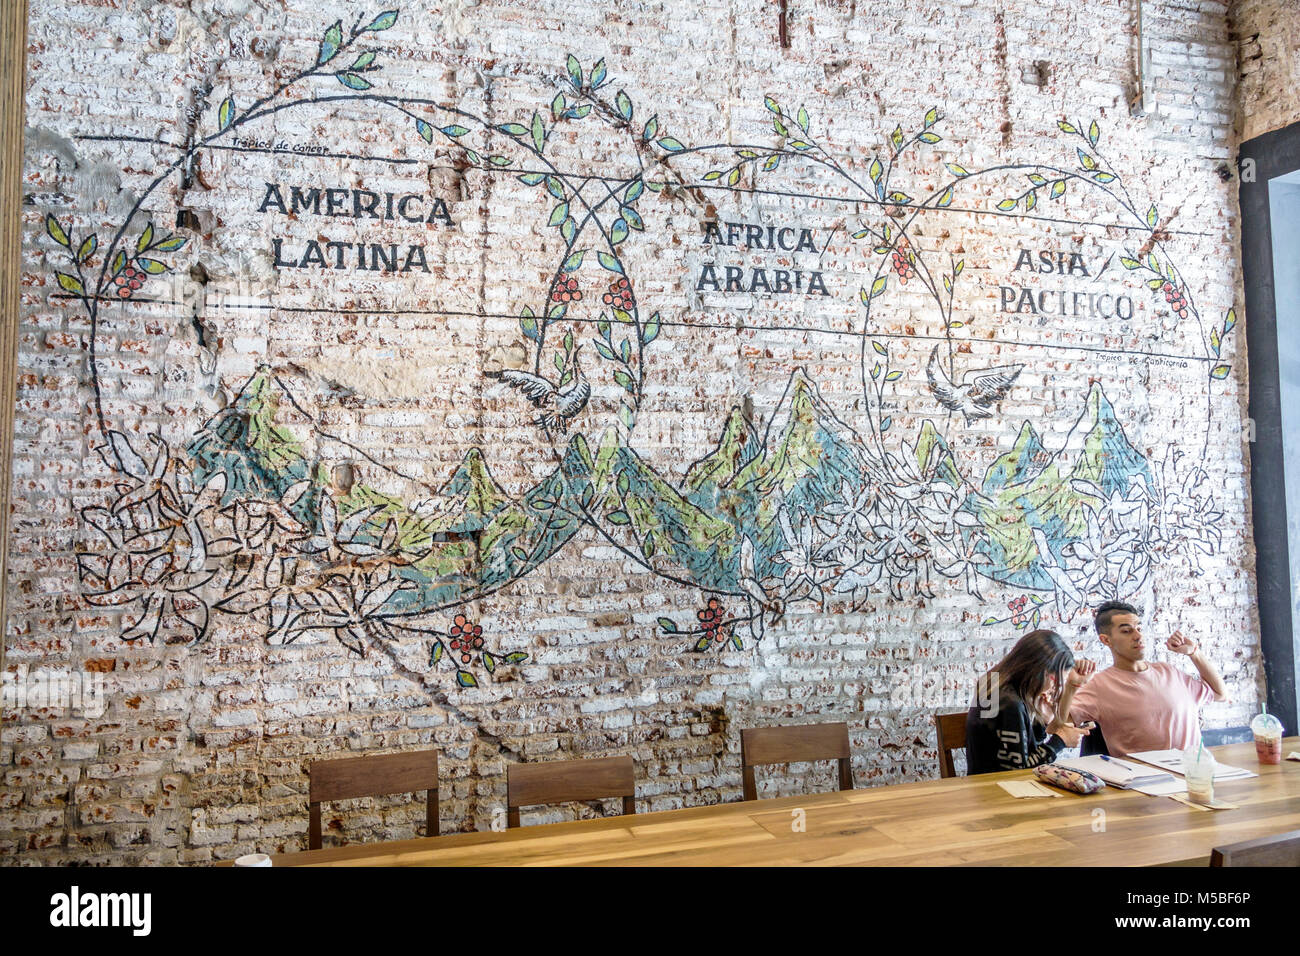 Buenos Aires Argentina,Galerias Pacifico,shopping mall,interior inside,Starbucks Coffee,cafe,coffeehouse,wall mural,exposed brick,table,adult adults m Stock Photo